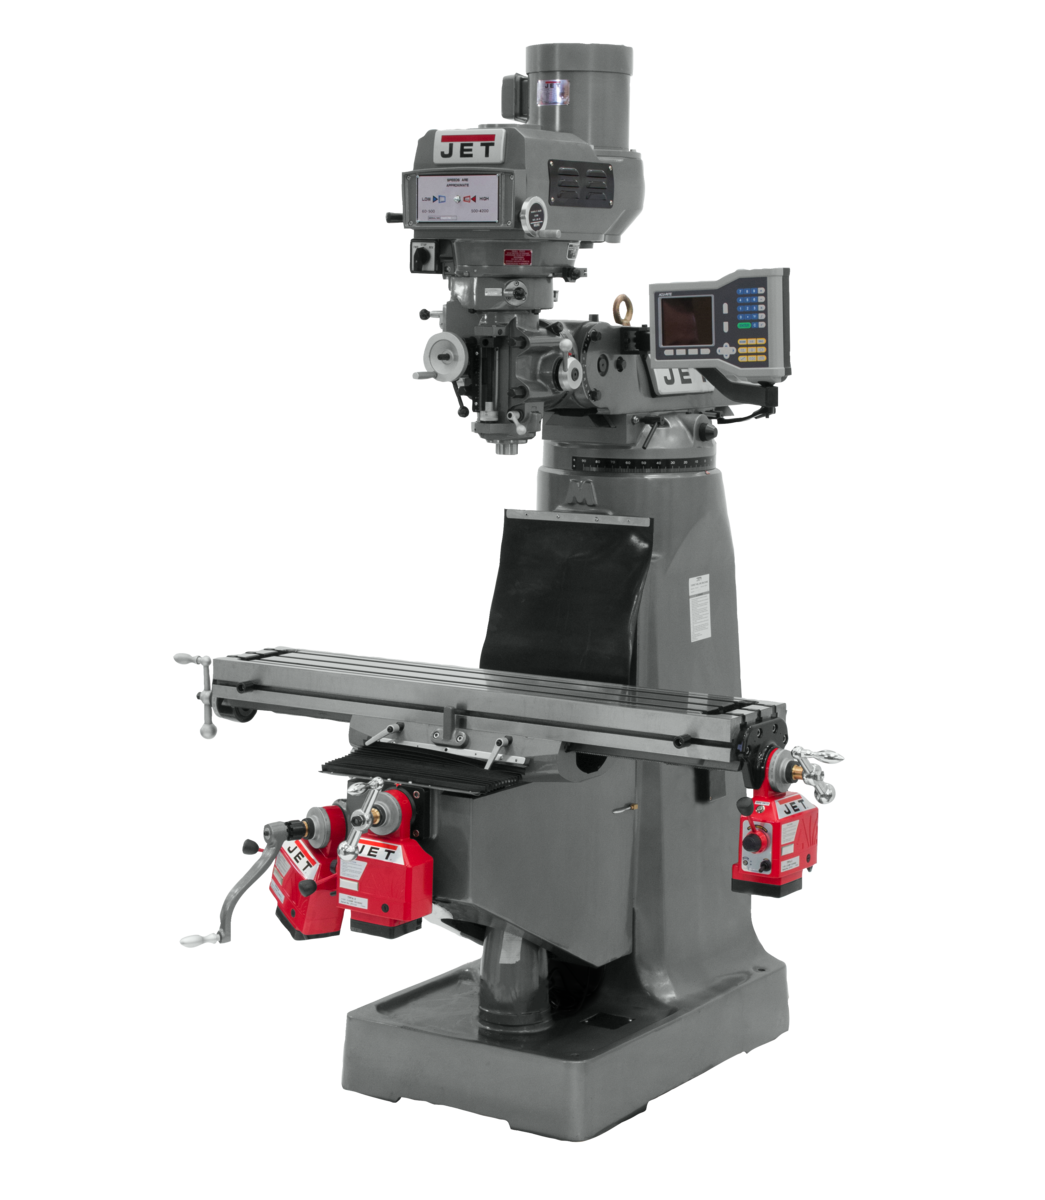 JTM-4VS Mill With 3-Axis ACU-RITE 303 DRO (Knee) With X, Y and Z-Axis Powerfeeds